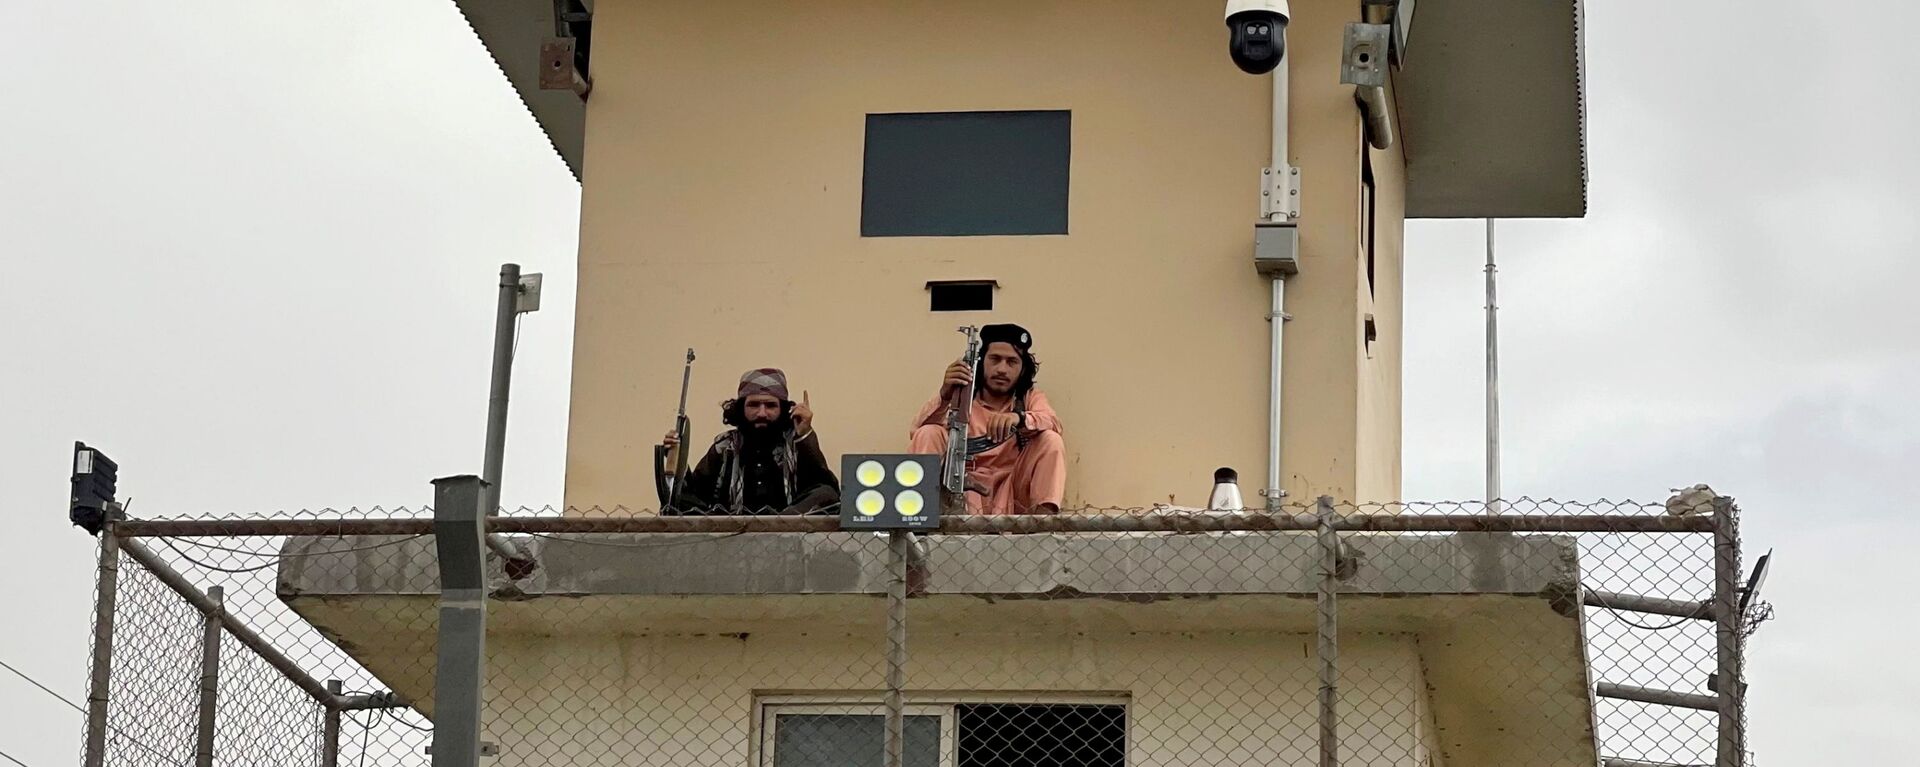 Members of Taliban forces sit at a security tower of the interior ministry in Kabul, Afghanistan August 17, 2021. - Sputnik International, 1920